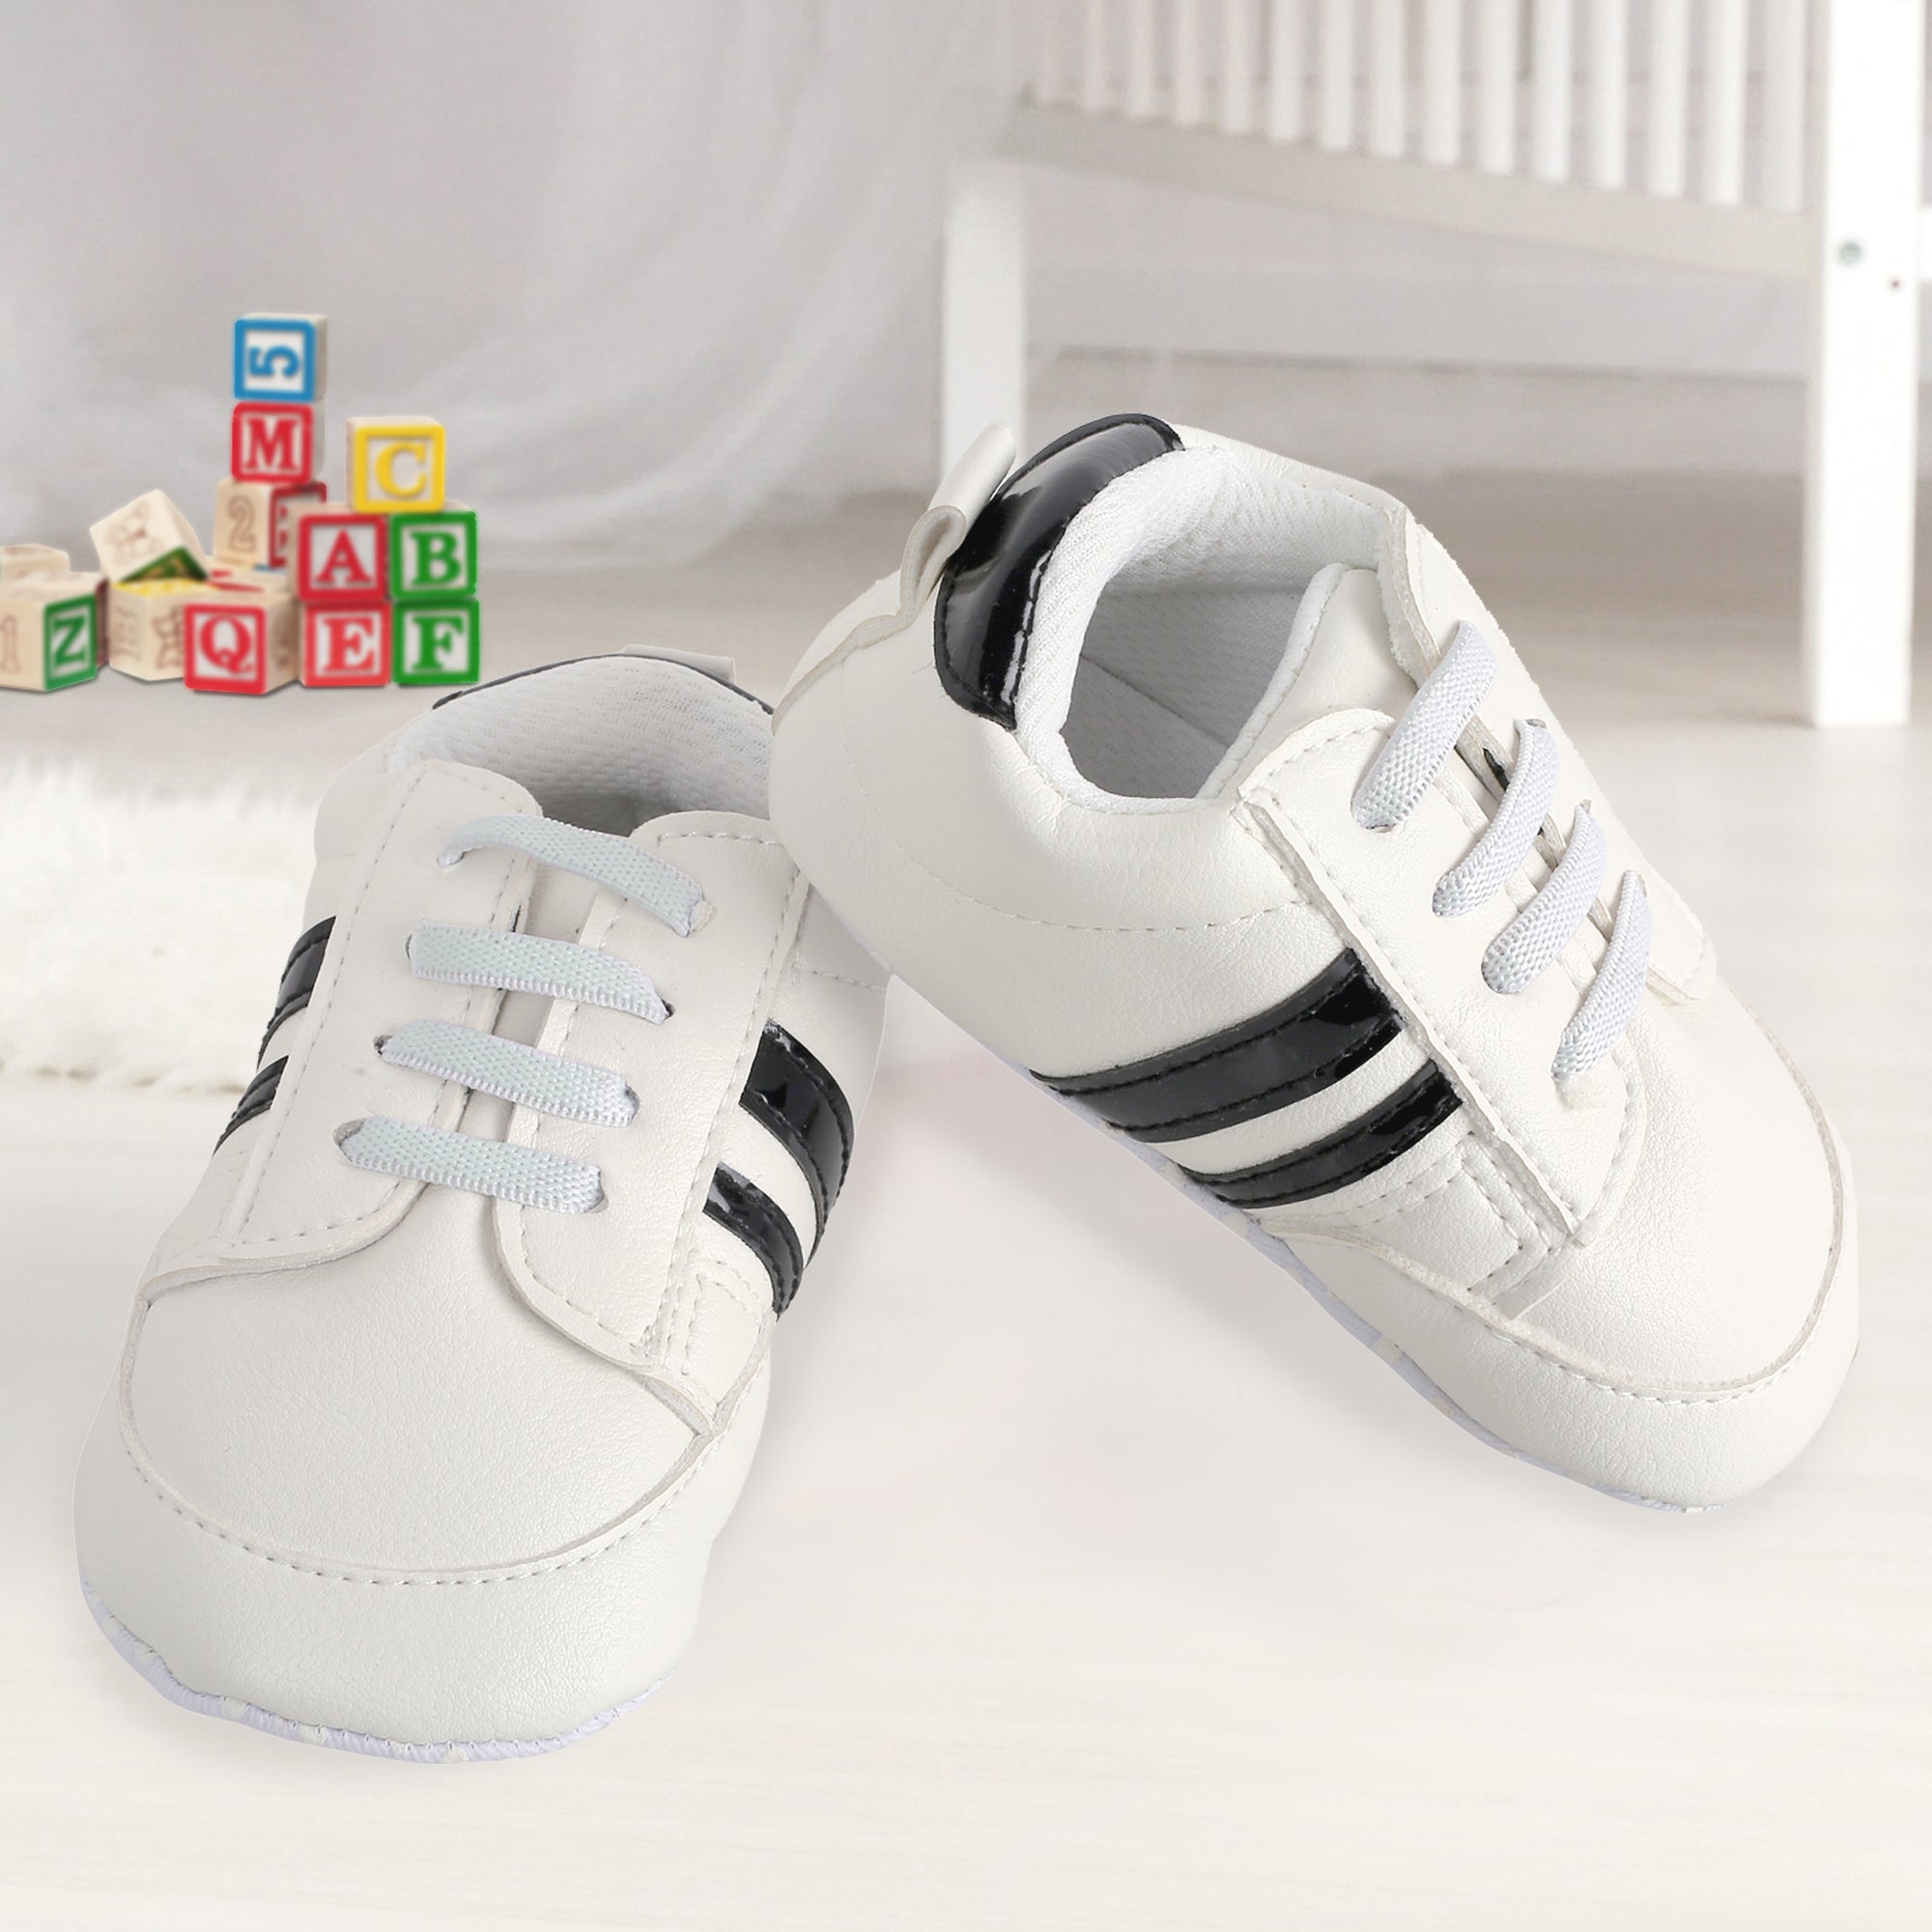 glimt Tage med holdall Buy Kids Sneakers Shoes Online for your Baby Boy - Baby Moo